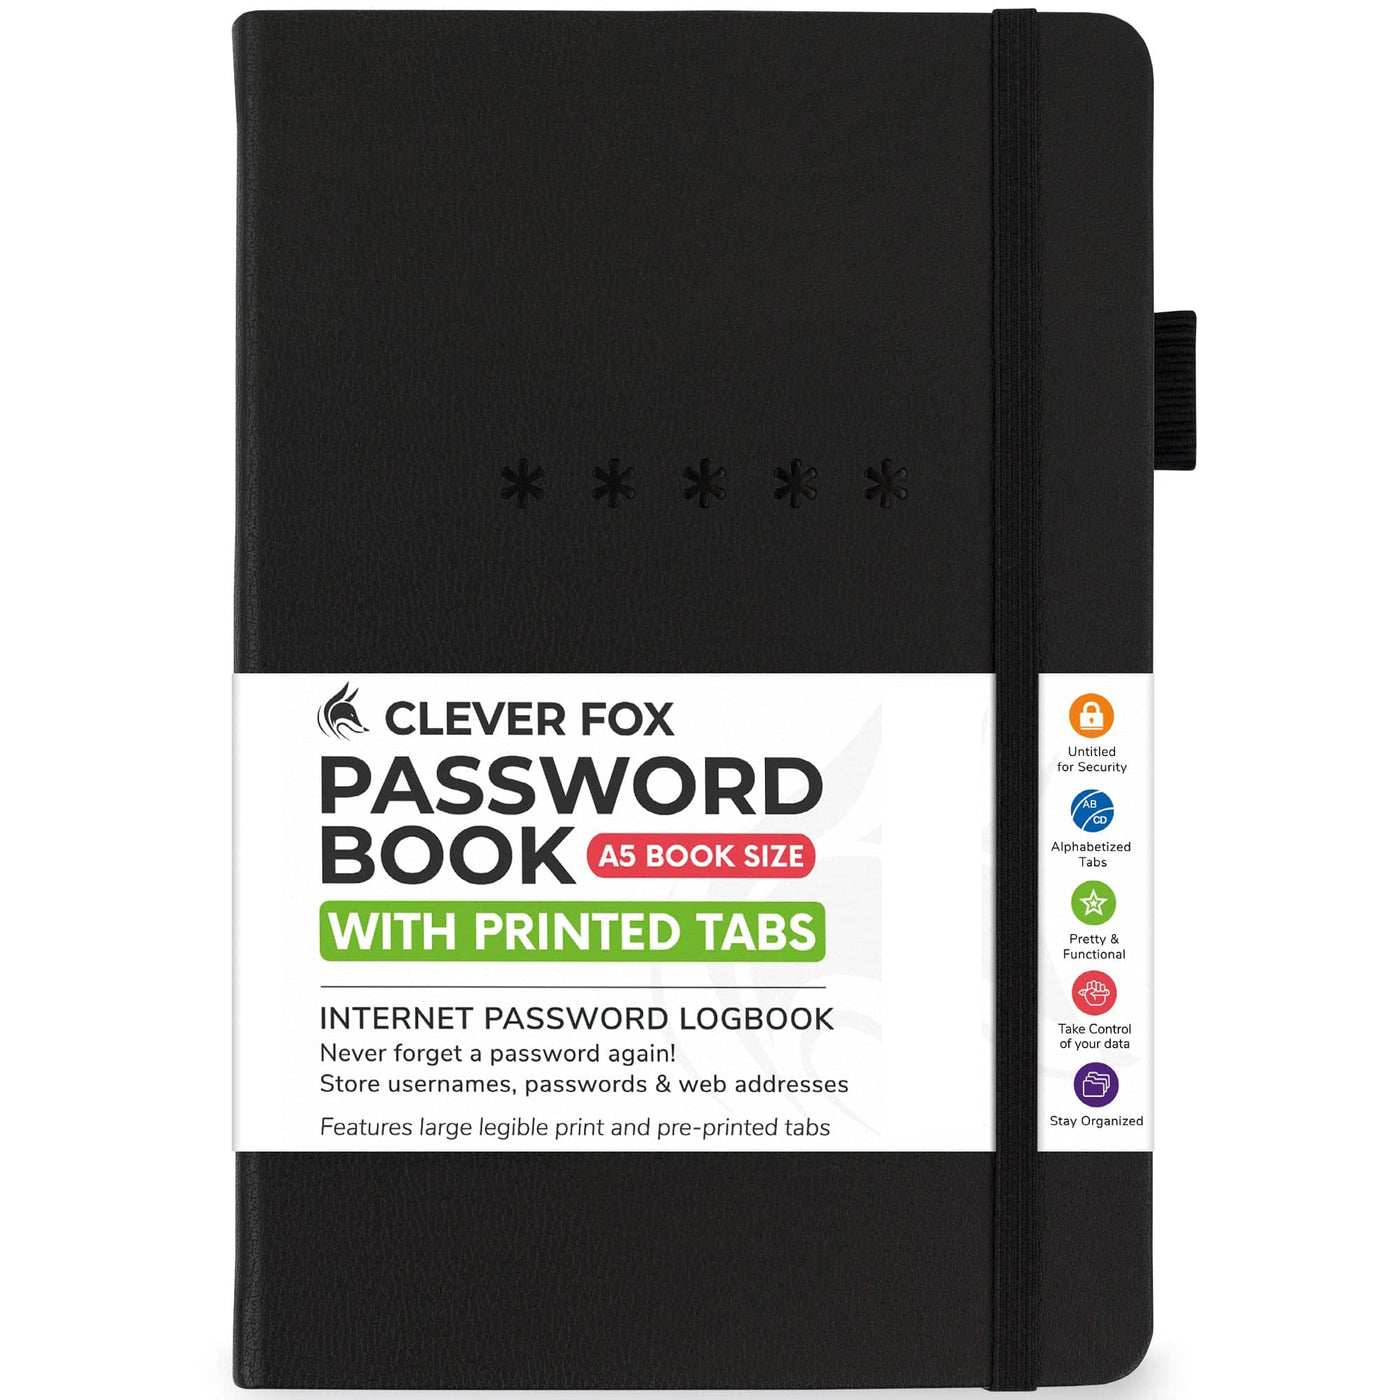 Clever Fox Password Book (Printed, not cutout tabs)